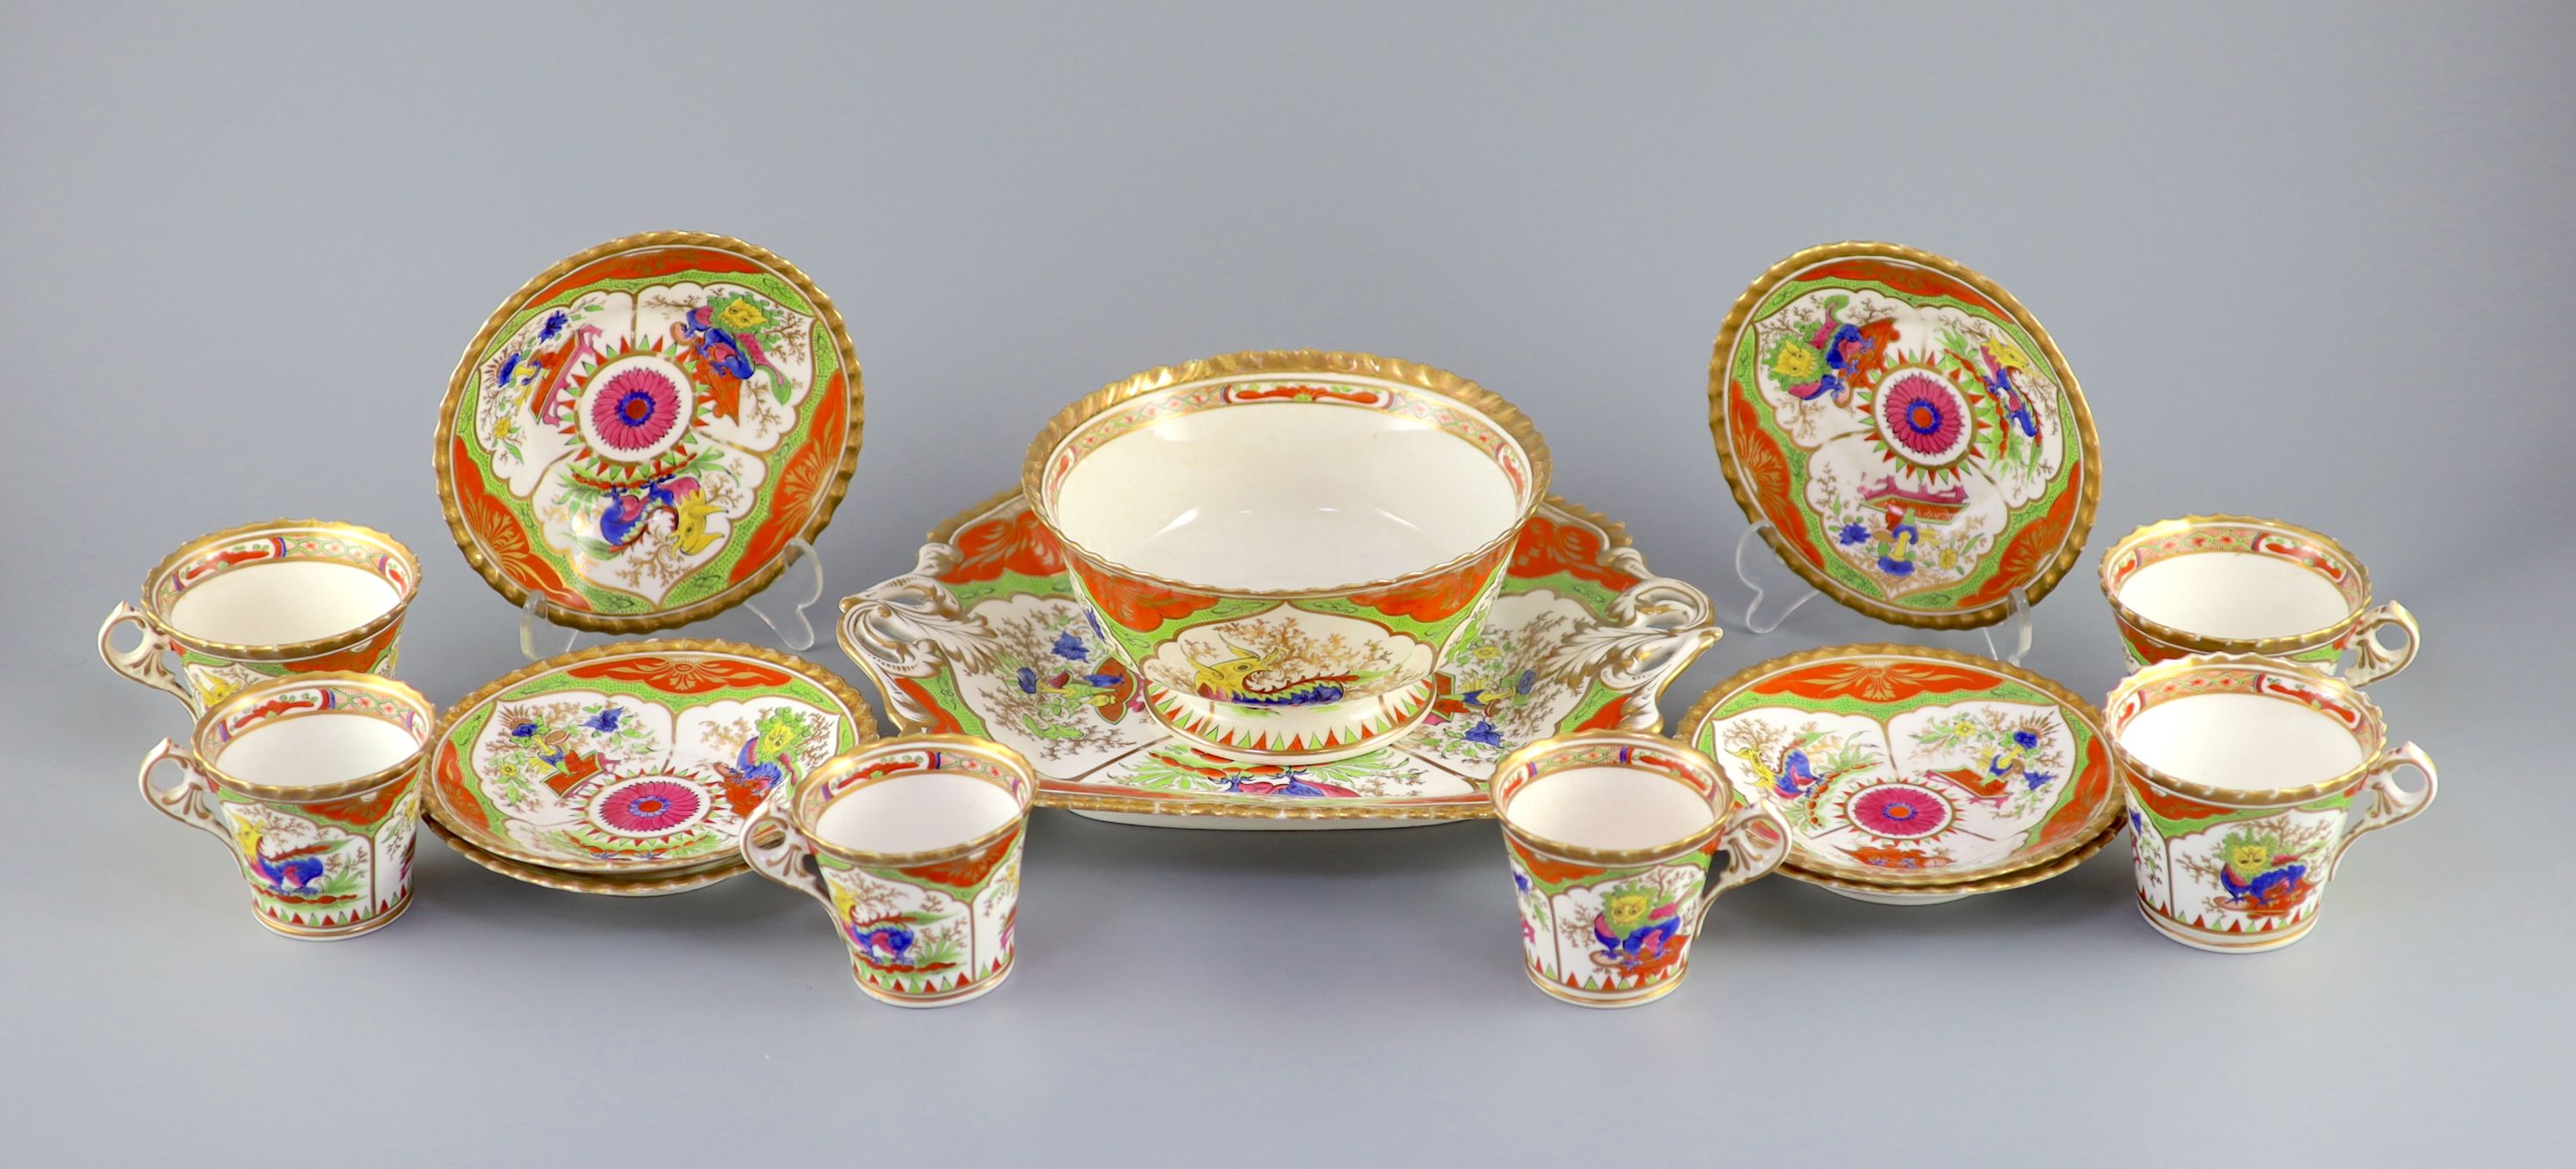 A Chamberlain & Co. Worcester ‘Bengal Tiger’ or ‘Dragons in Compartments’ part tea and coffee set, c.1840, (14)